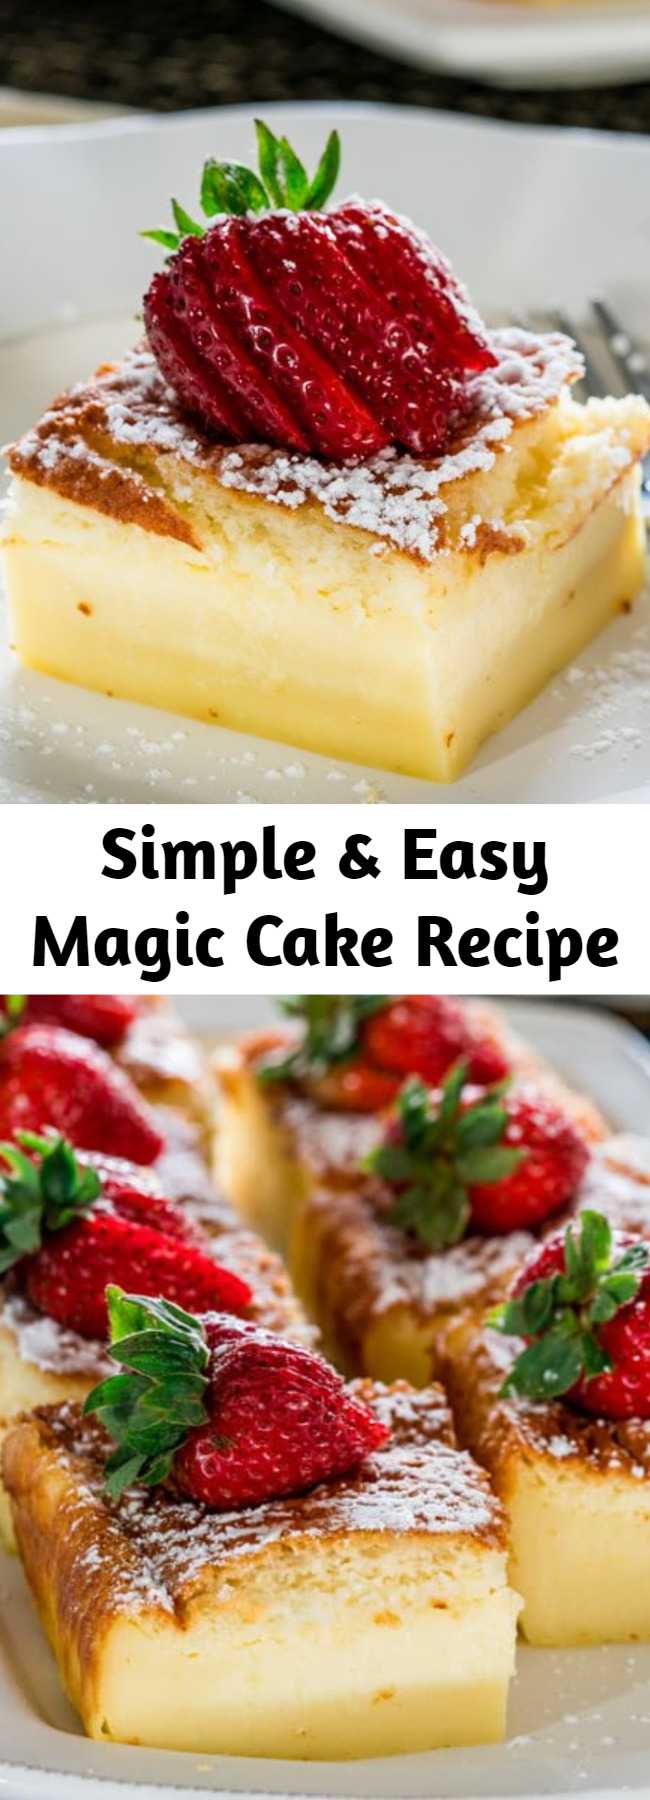 Simple & Easy Magic Cake Recipe - One simple thin batter, bake it and voila! You end up with a 3 layer cake, with a delicious custardy layer in the center. It really is magical.